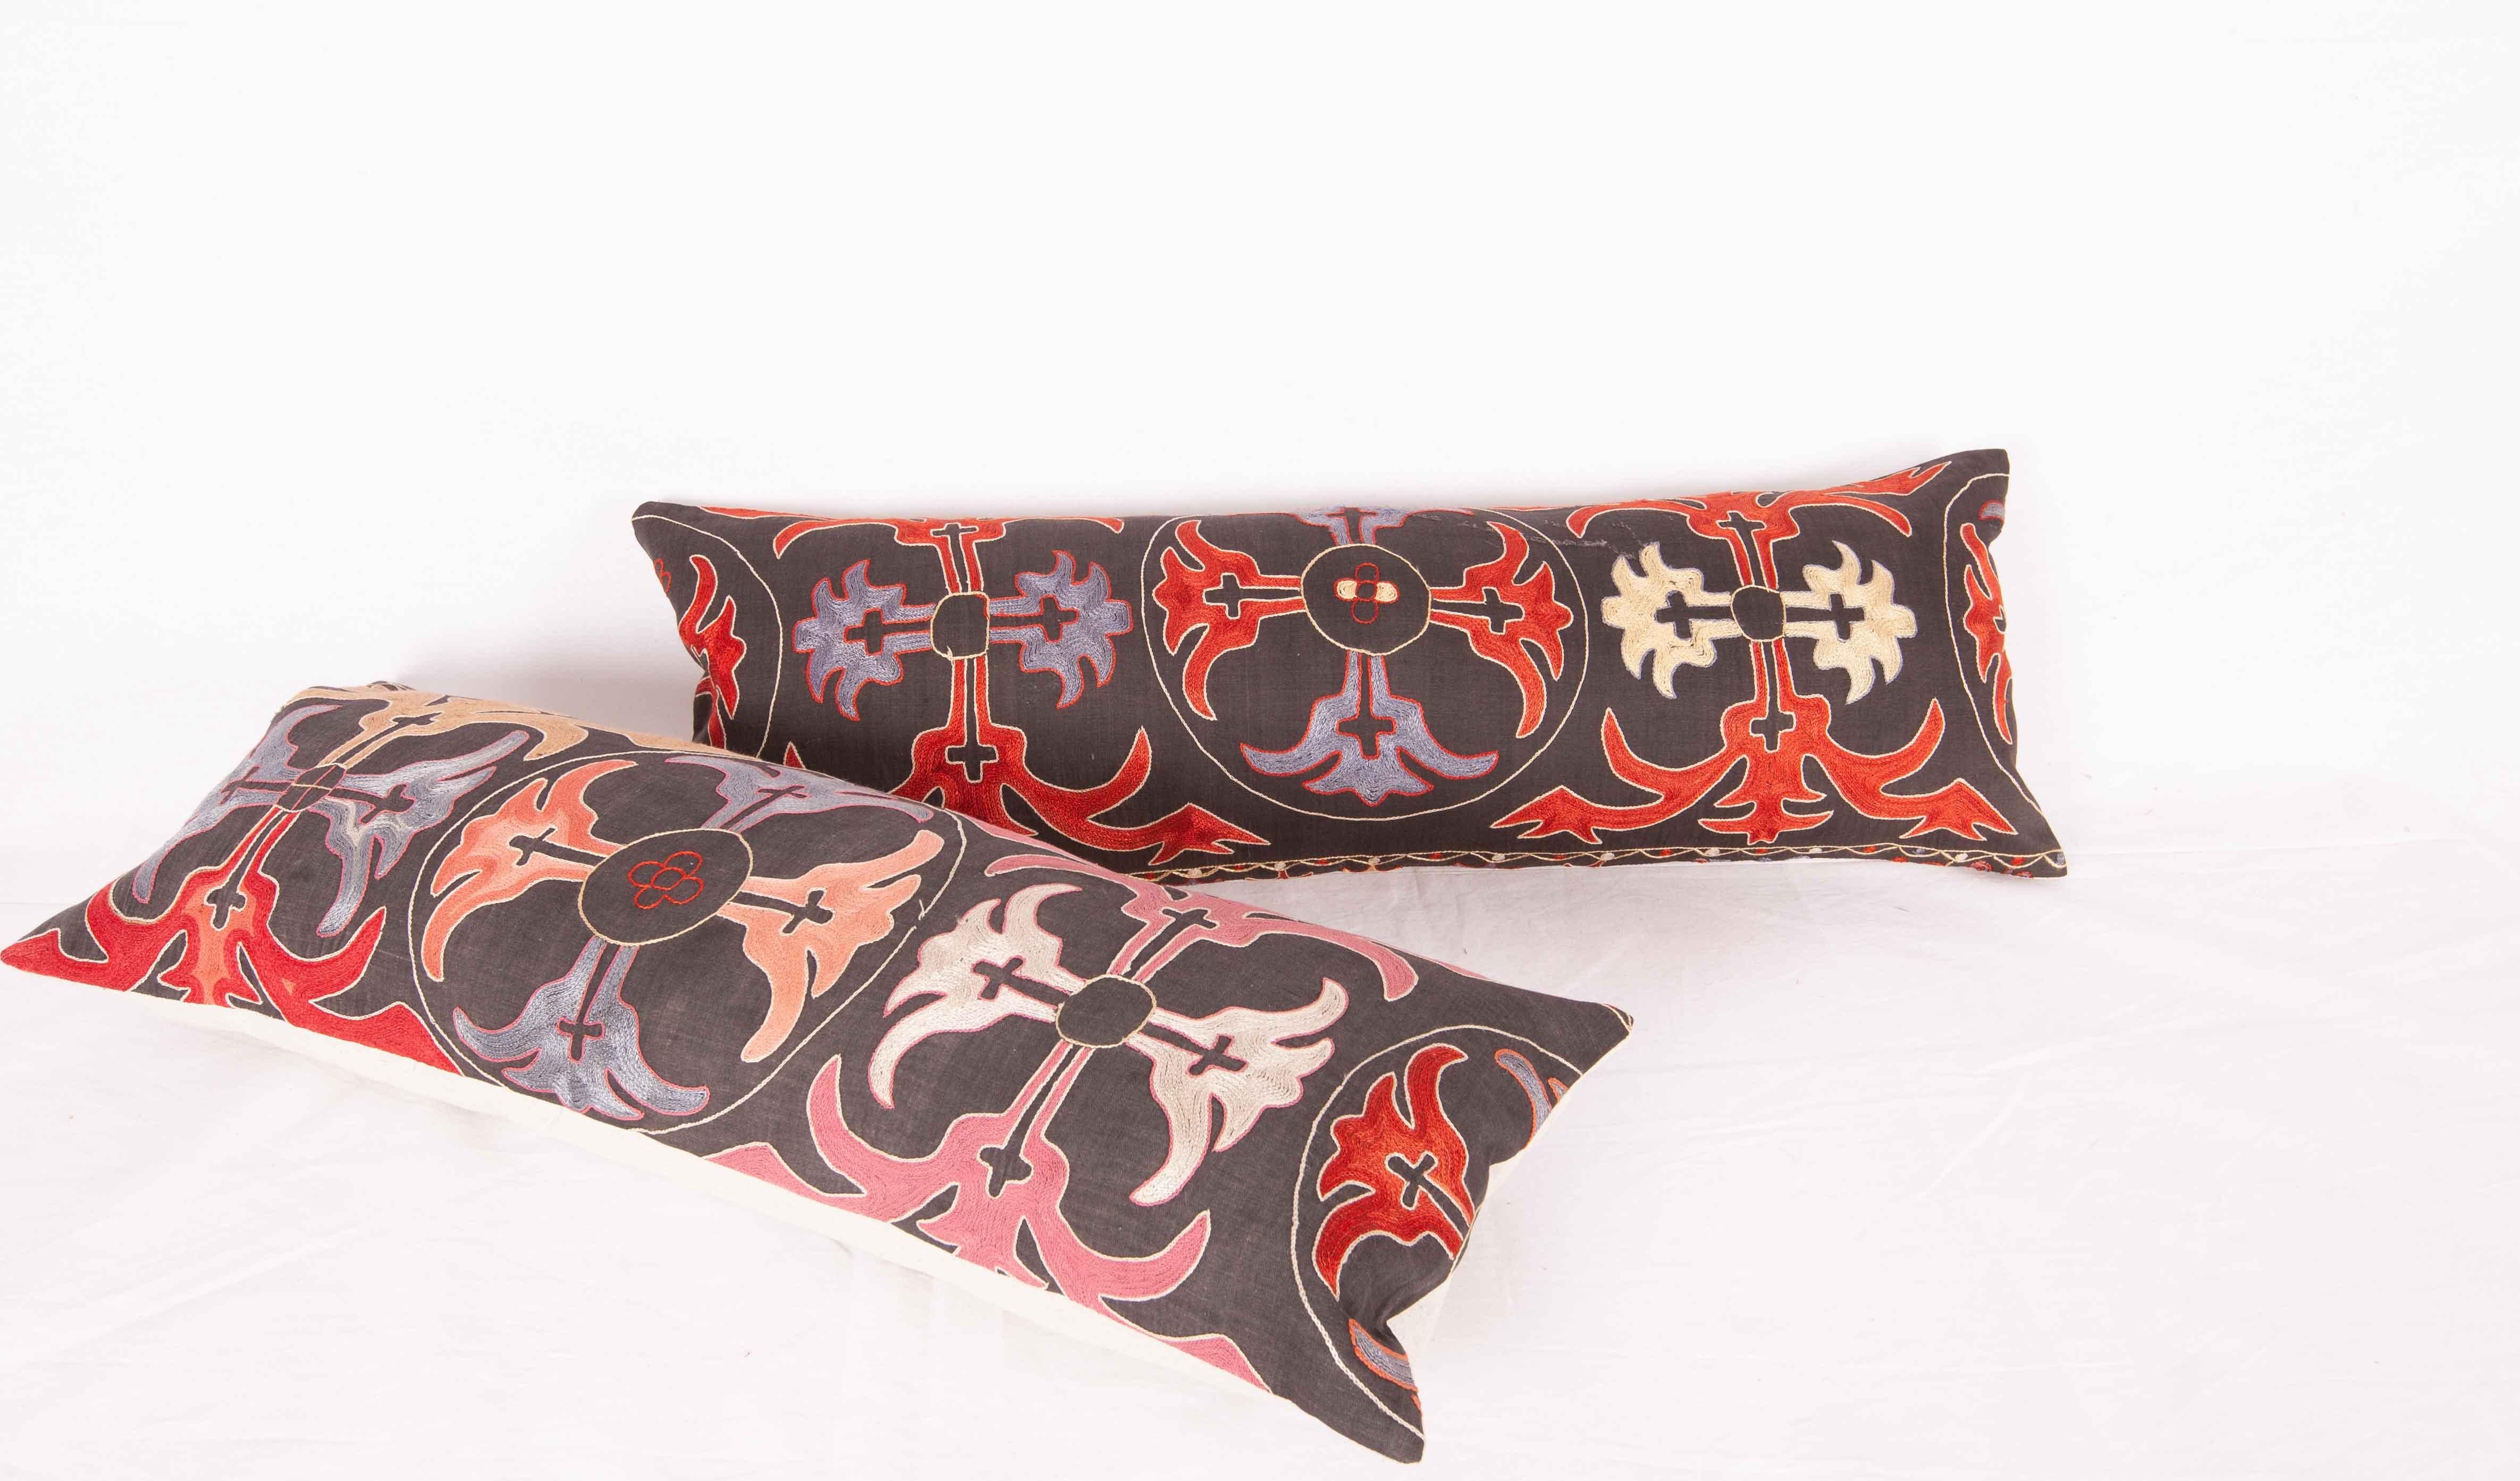 Suzani Vintage  Pillow Cases fashioned from a Kyrgyz or Kazak Embroidery For Sale